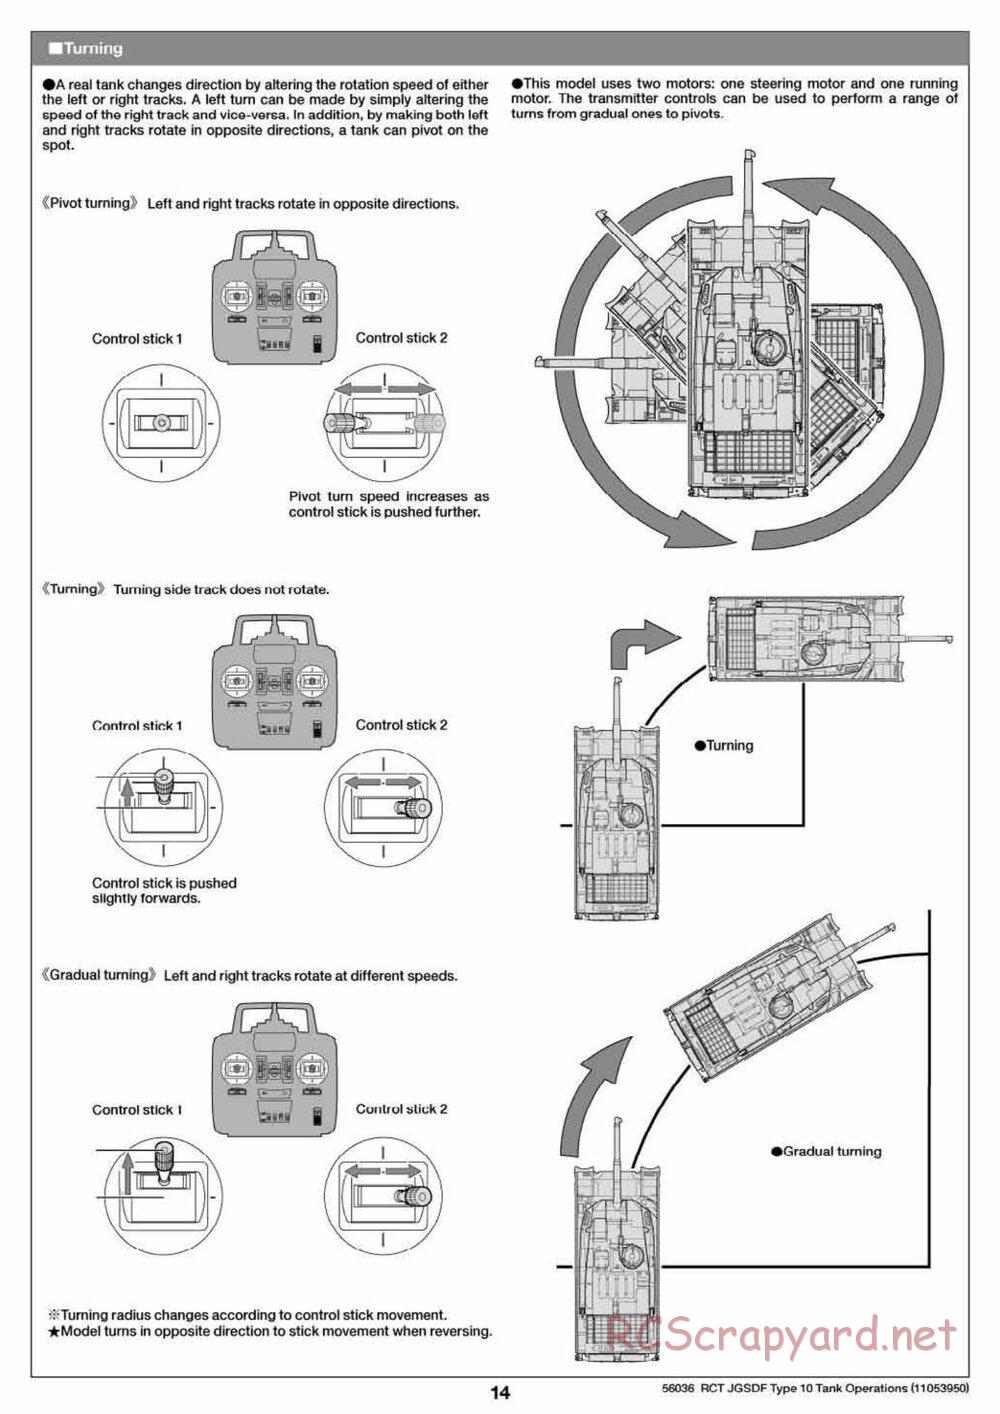 Tamiya - JGSDF Type 10 Tank - 1/16 Scale Chassis - Operation Manual - Page 4